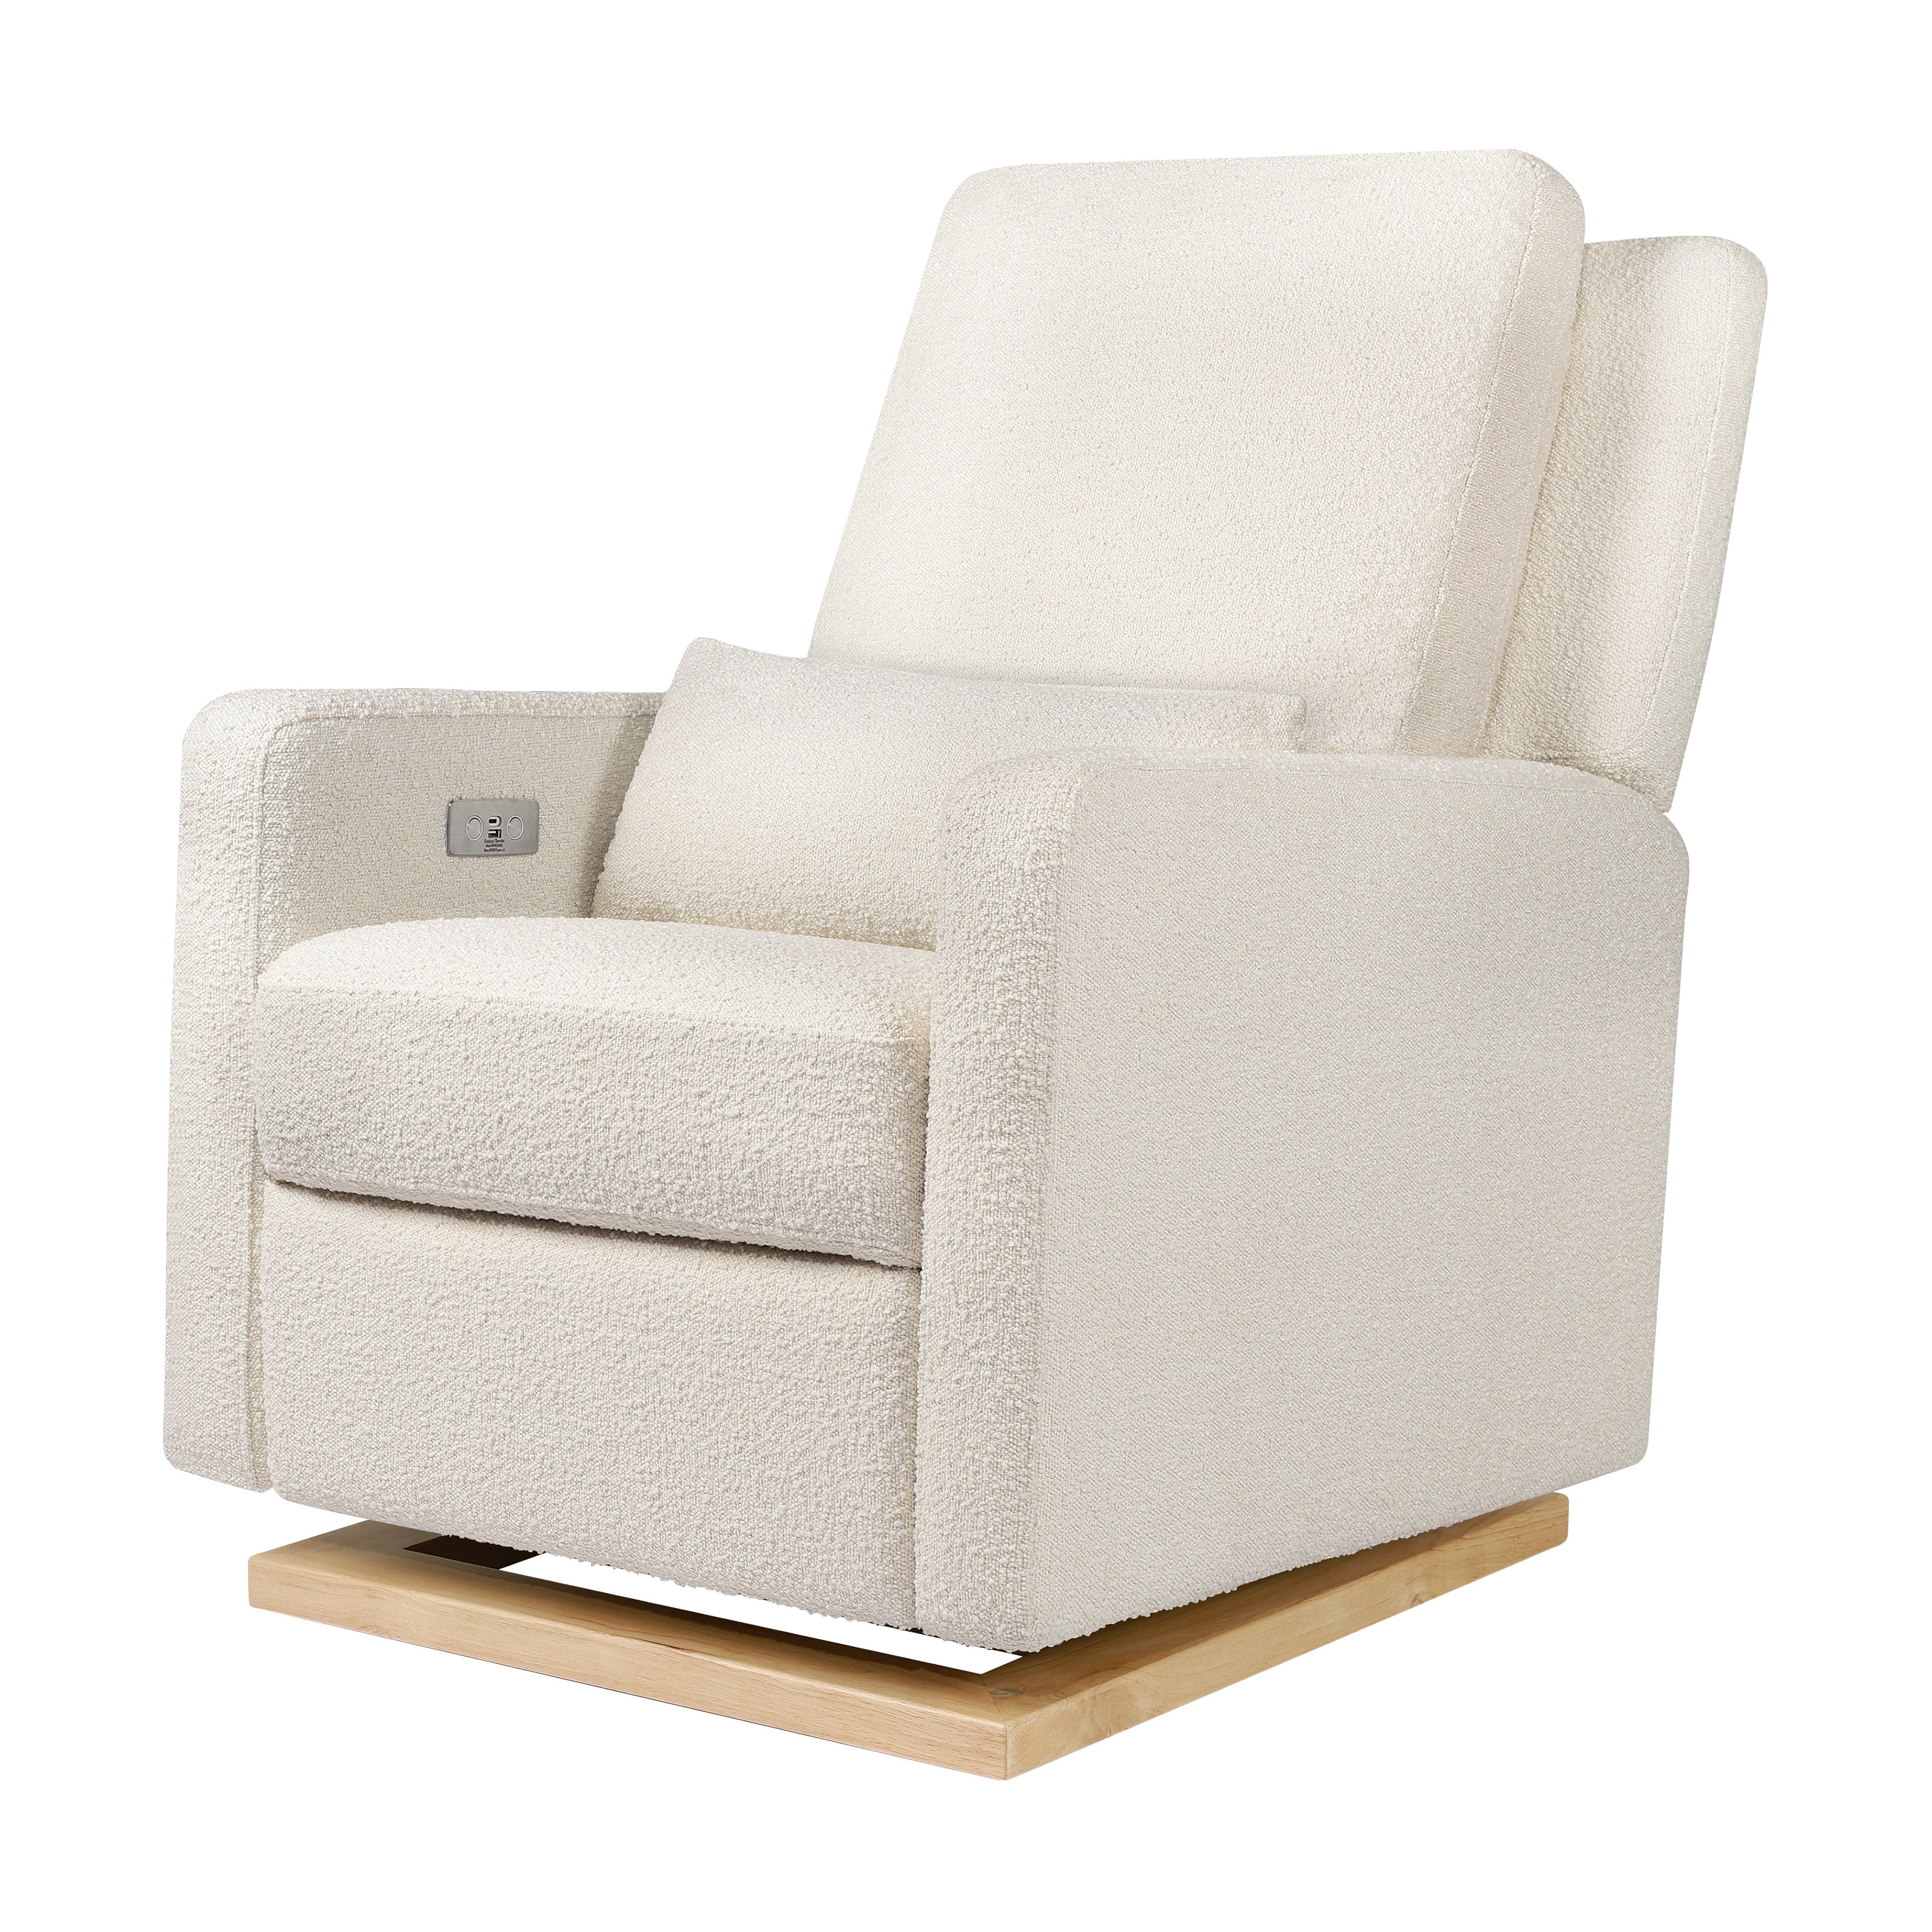 Sigi Electronic Recliner and Glider in Ivory Boucle with Light Wood Base - Twinkle Twinkle Little One